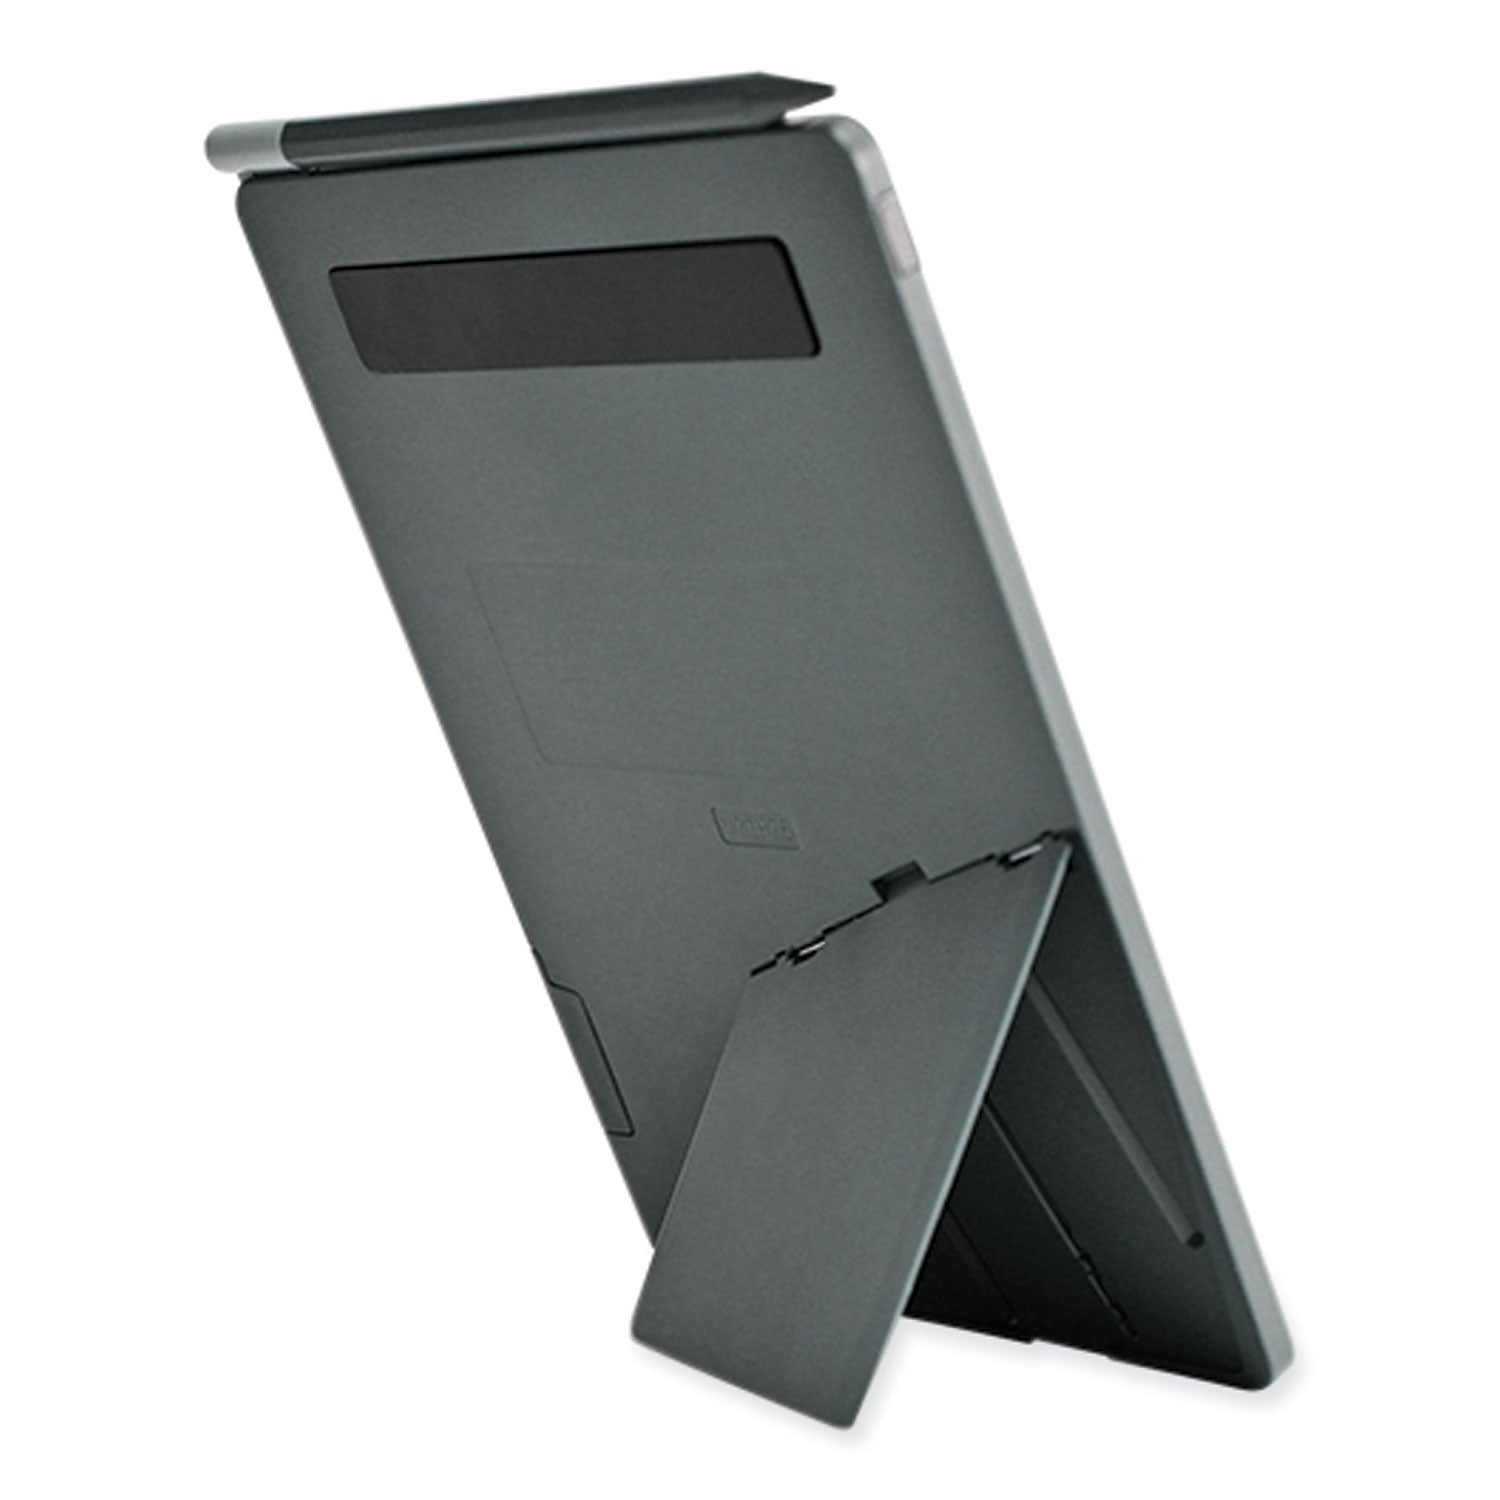 versaboard-reusable-writing-tablet-85-lcd-touchscreen-55-x-725-mineral-green-black_imv0560001 - 2